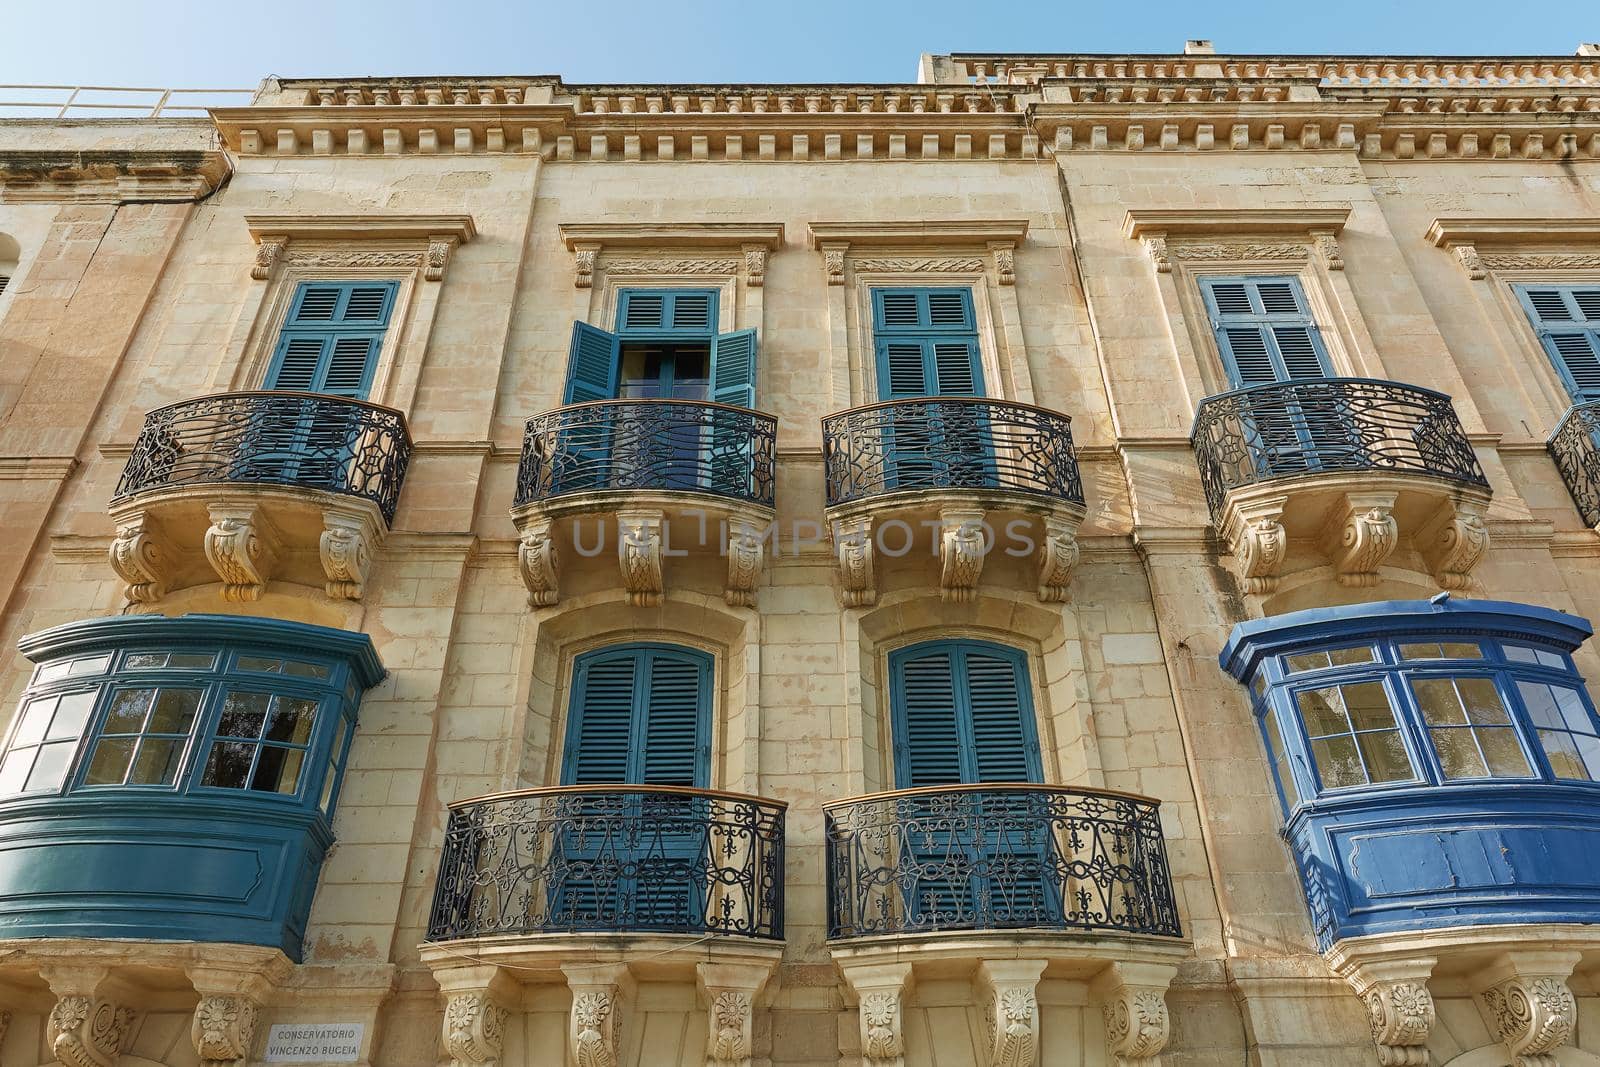 Typical and traditional colorful architecture and houses in Valletta in Malta.